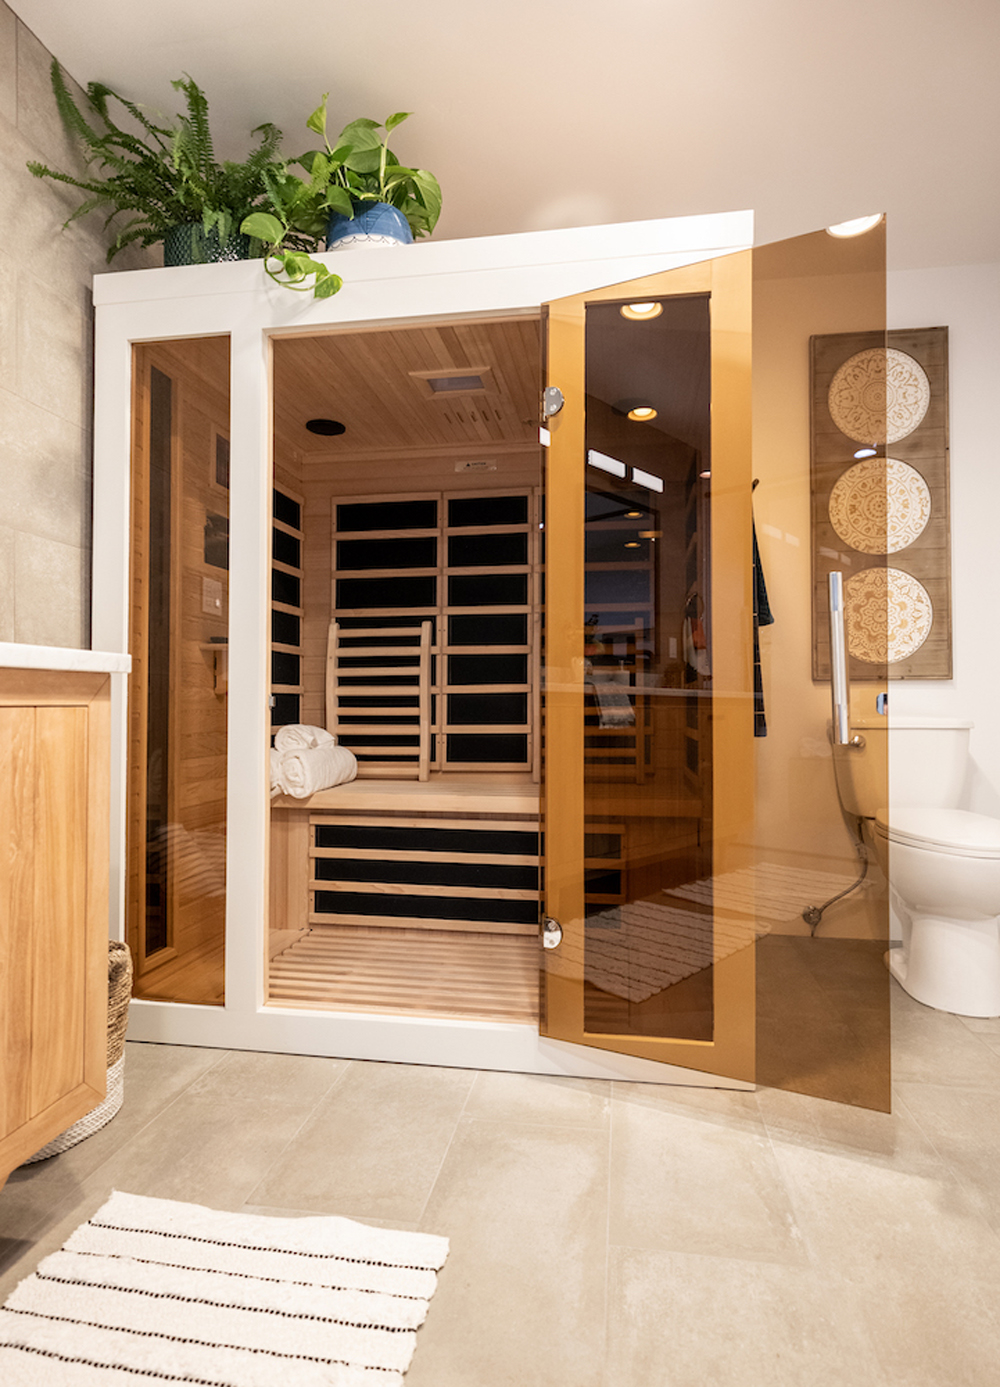 A renovated master bathroom with a large, private cedar-lined infrared sauna with a tinted glass door